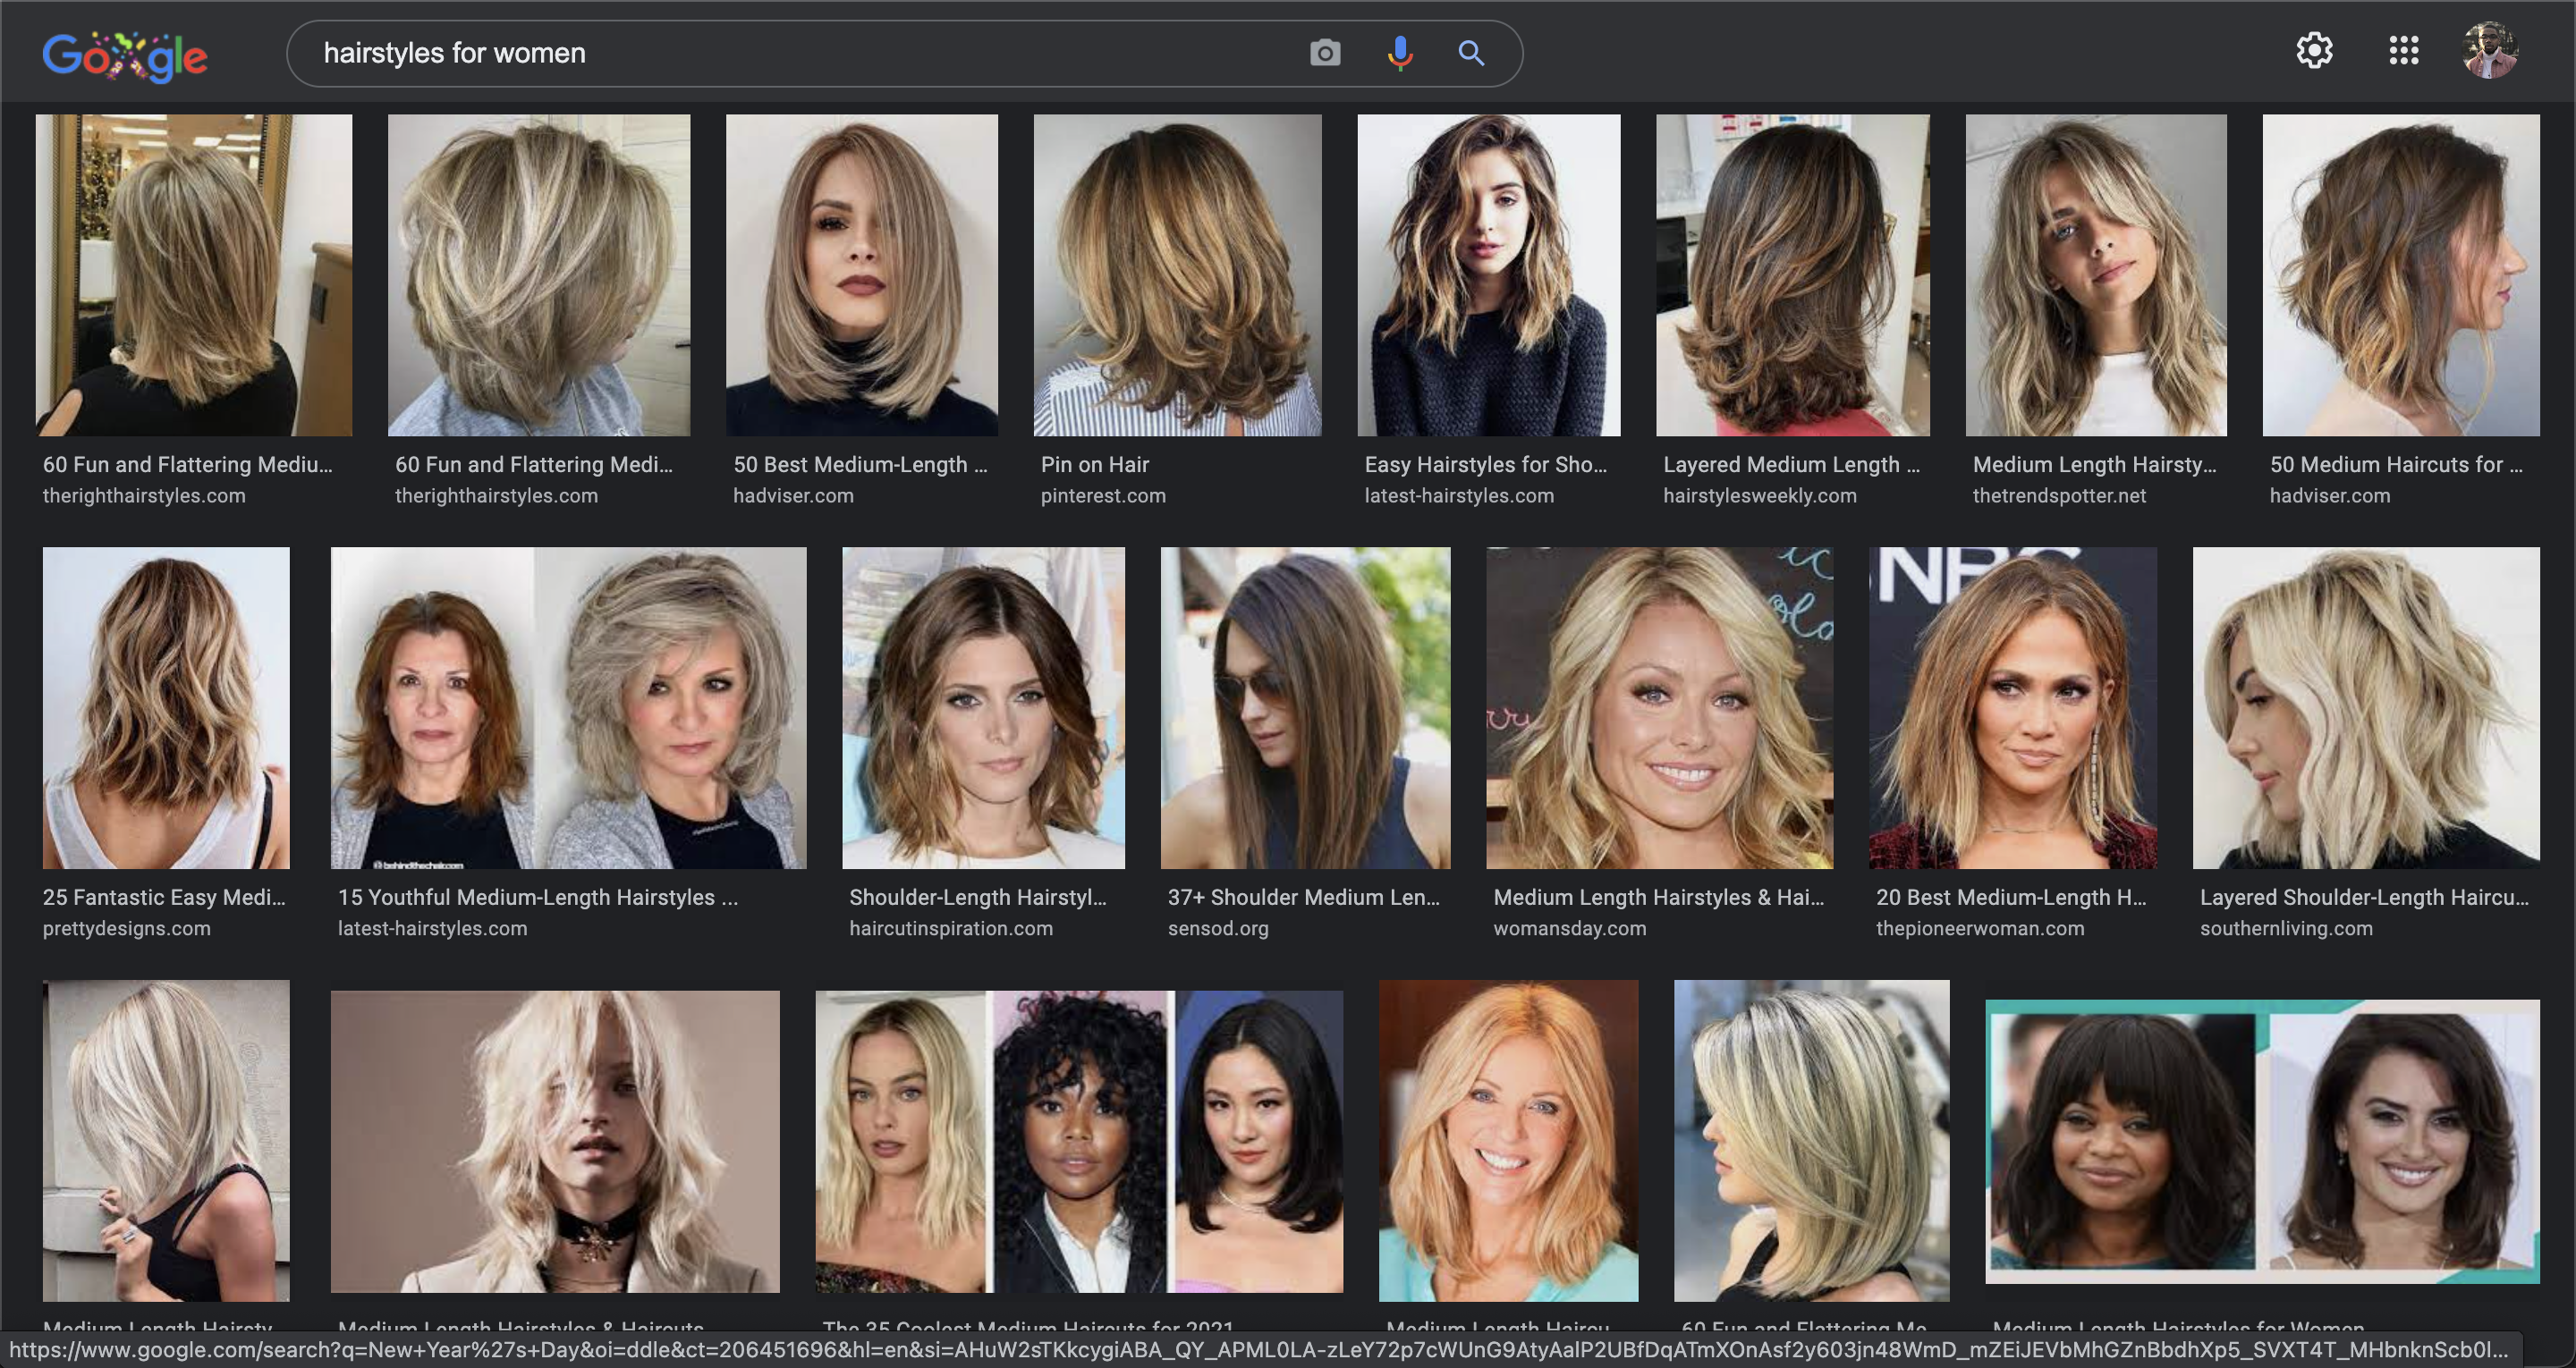 An image of a google search. The search is based around hairstyles for women. Most of the results shown are of white women and white hairstyles